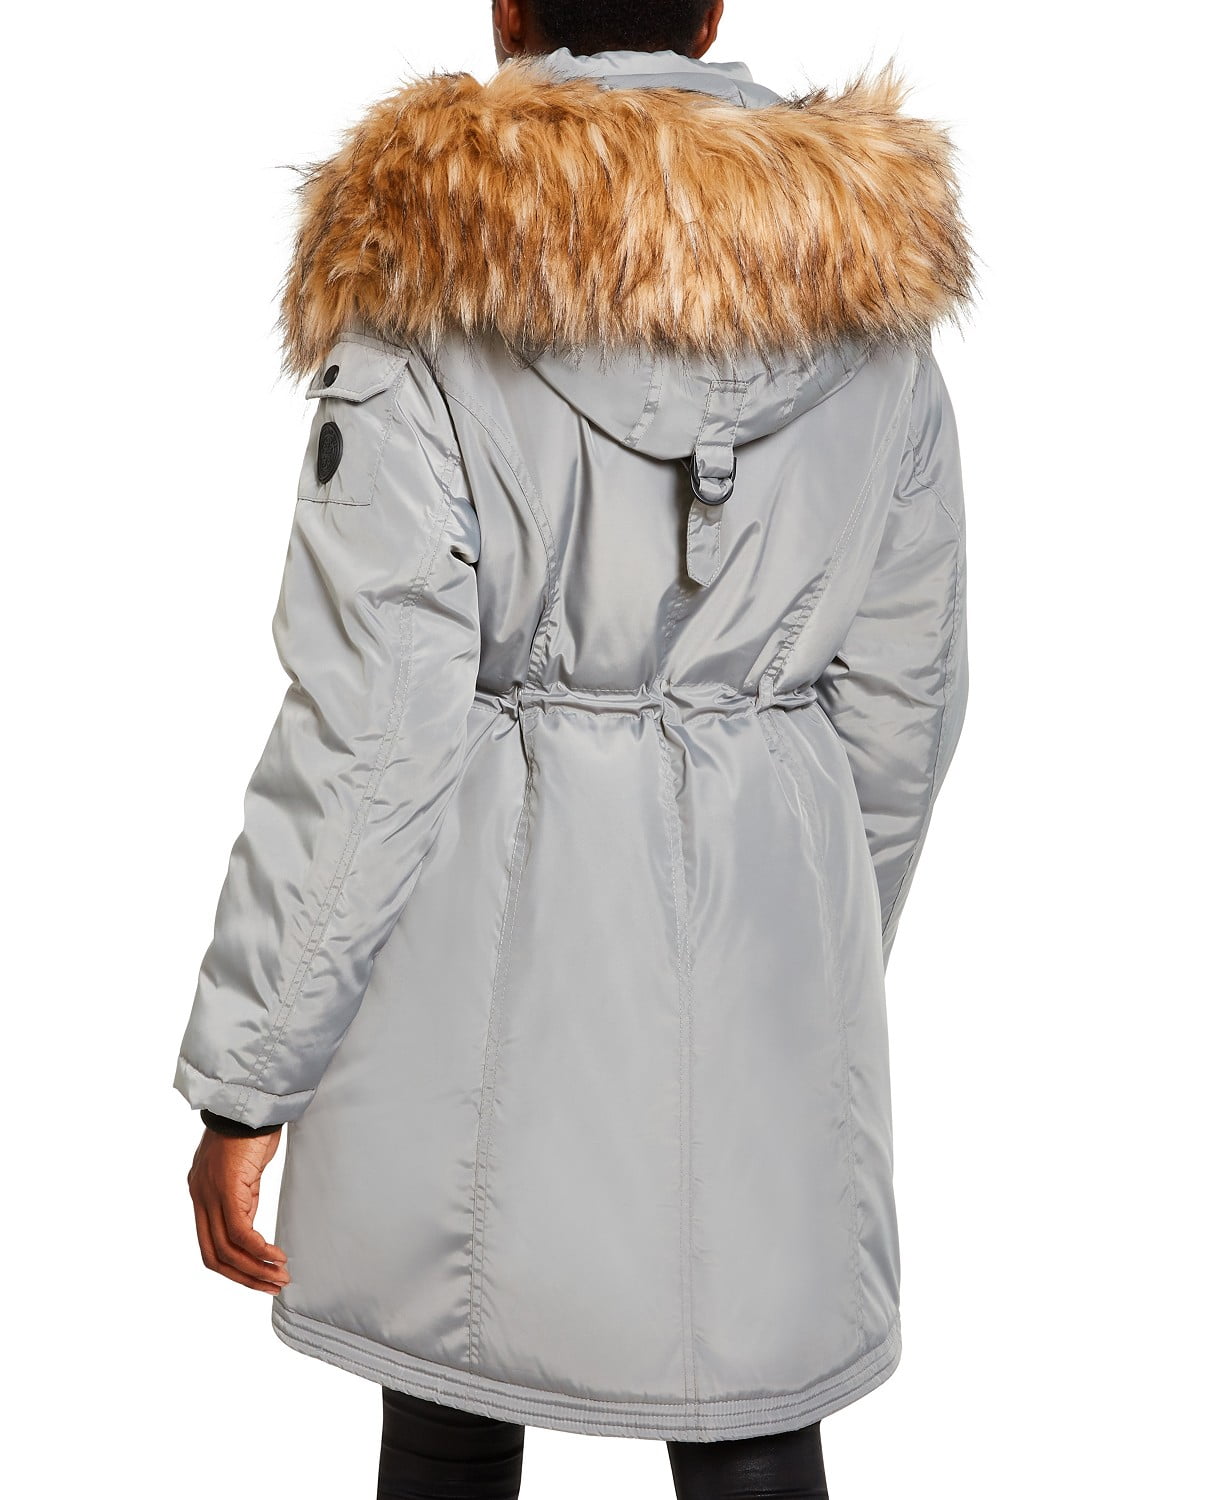 www.couturepoint.com-madden-girl-womens-grey-faux-fur-trim-hooded-anorak-parka